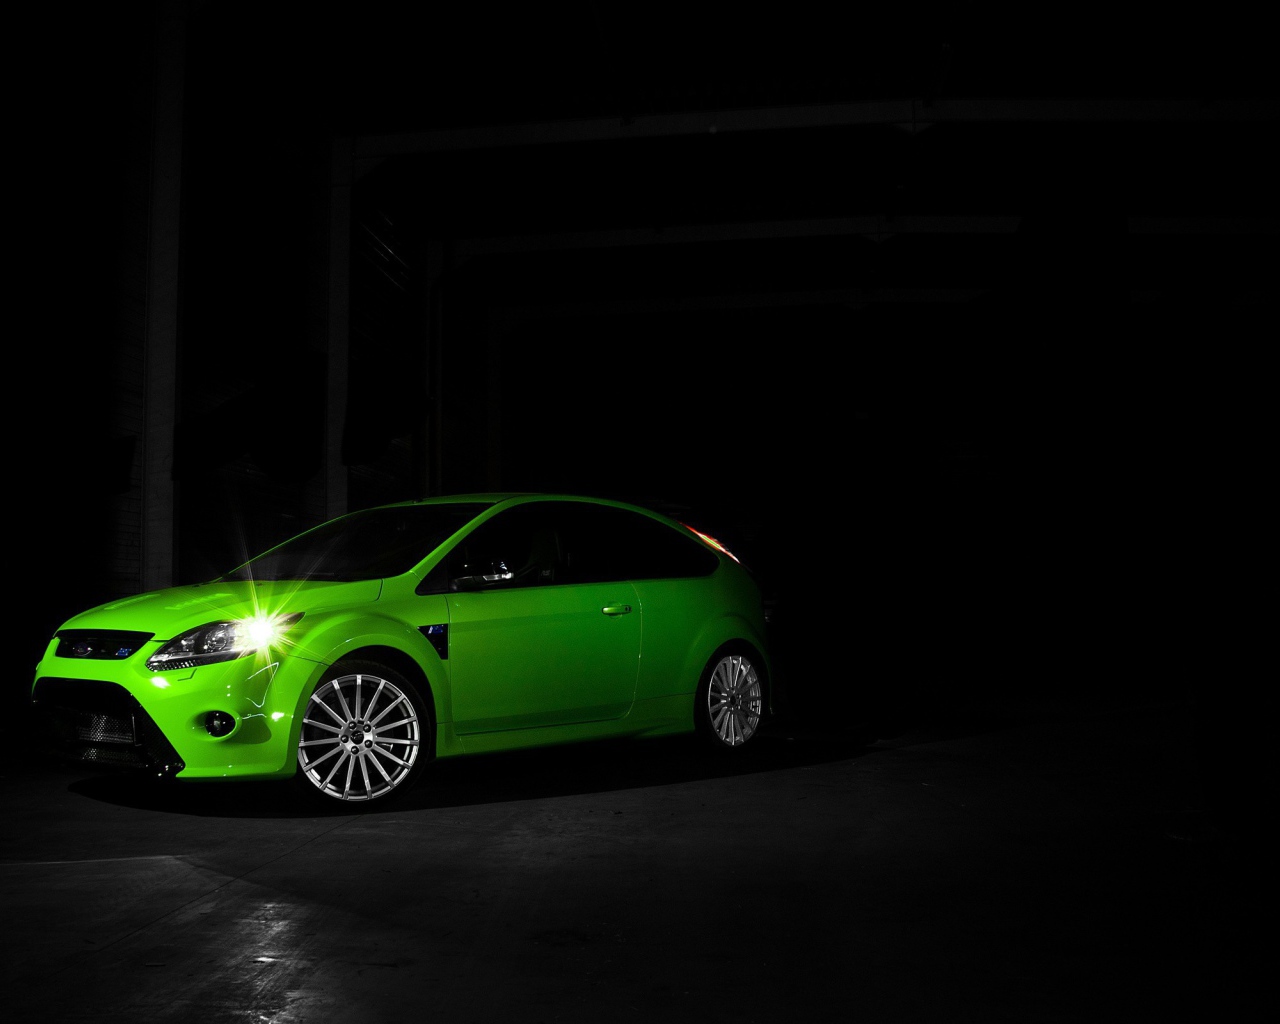 Green Ford in the dark